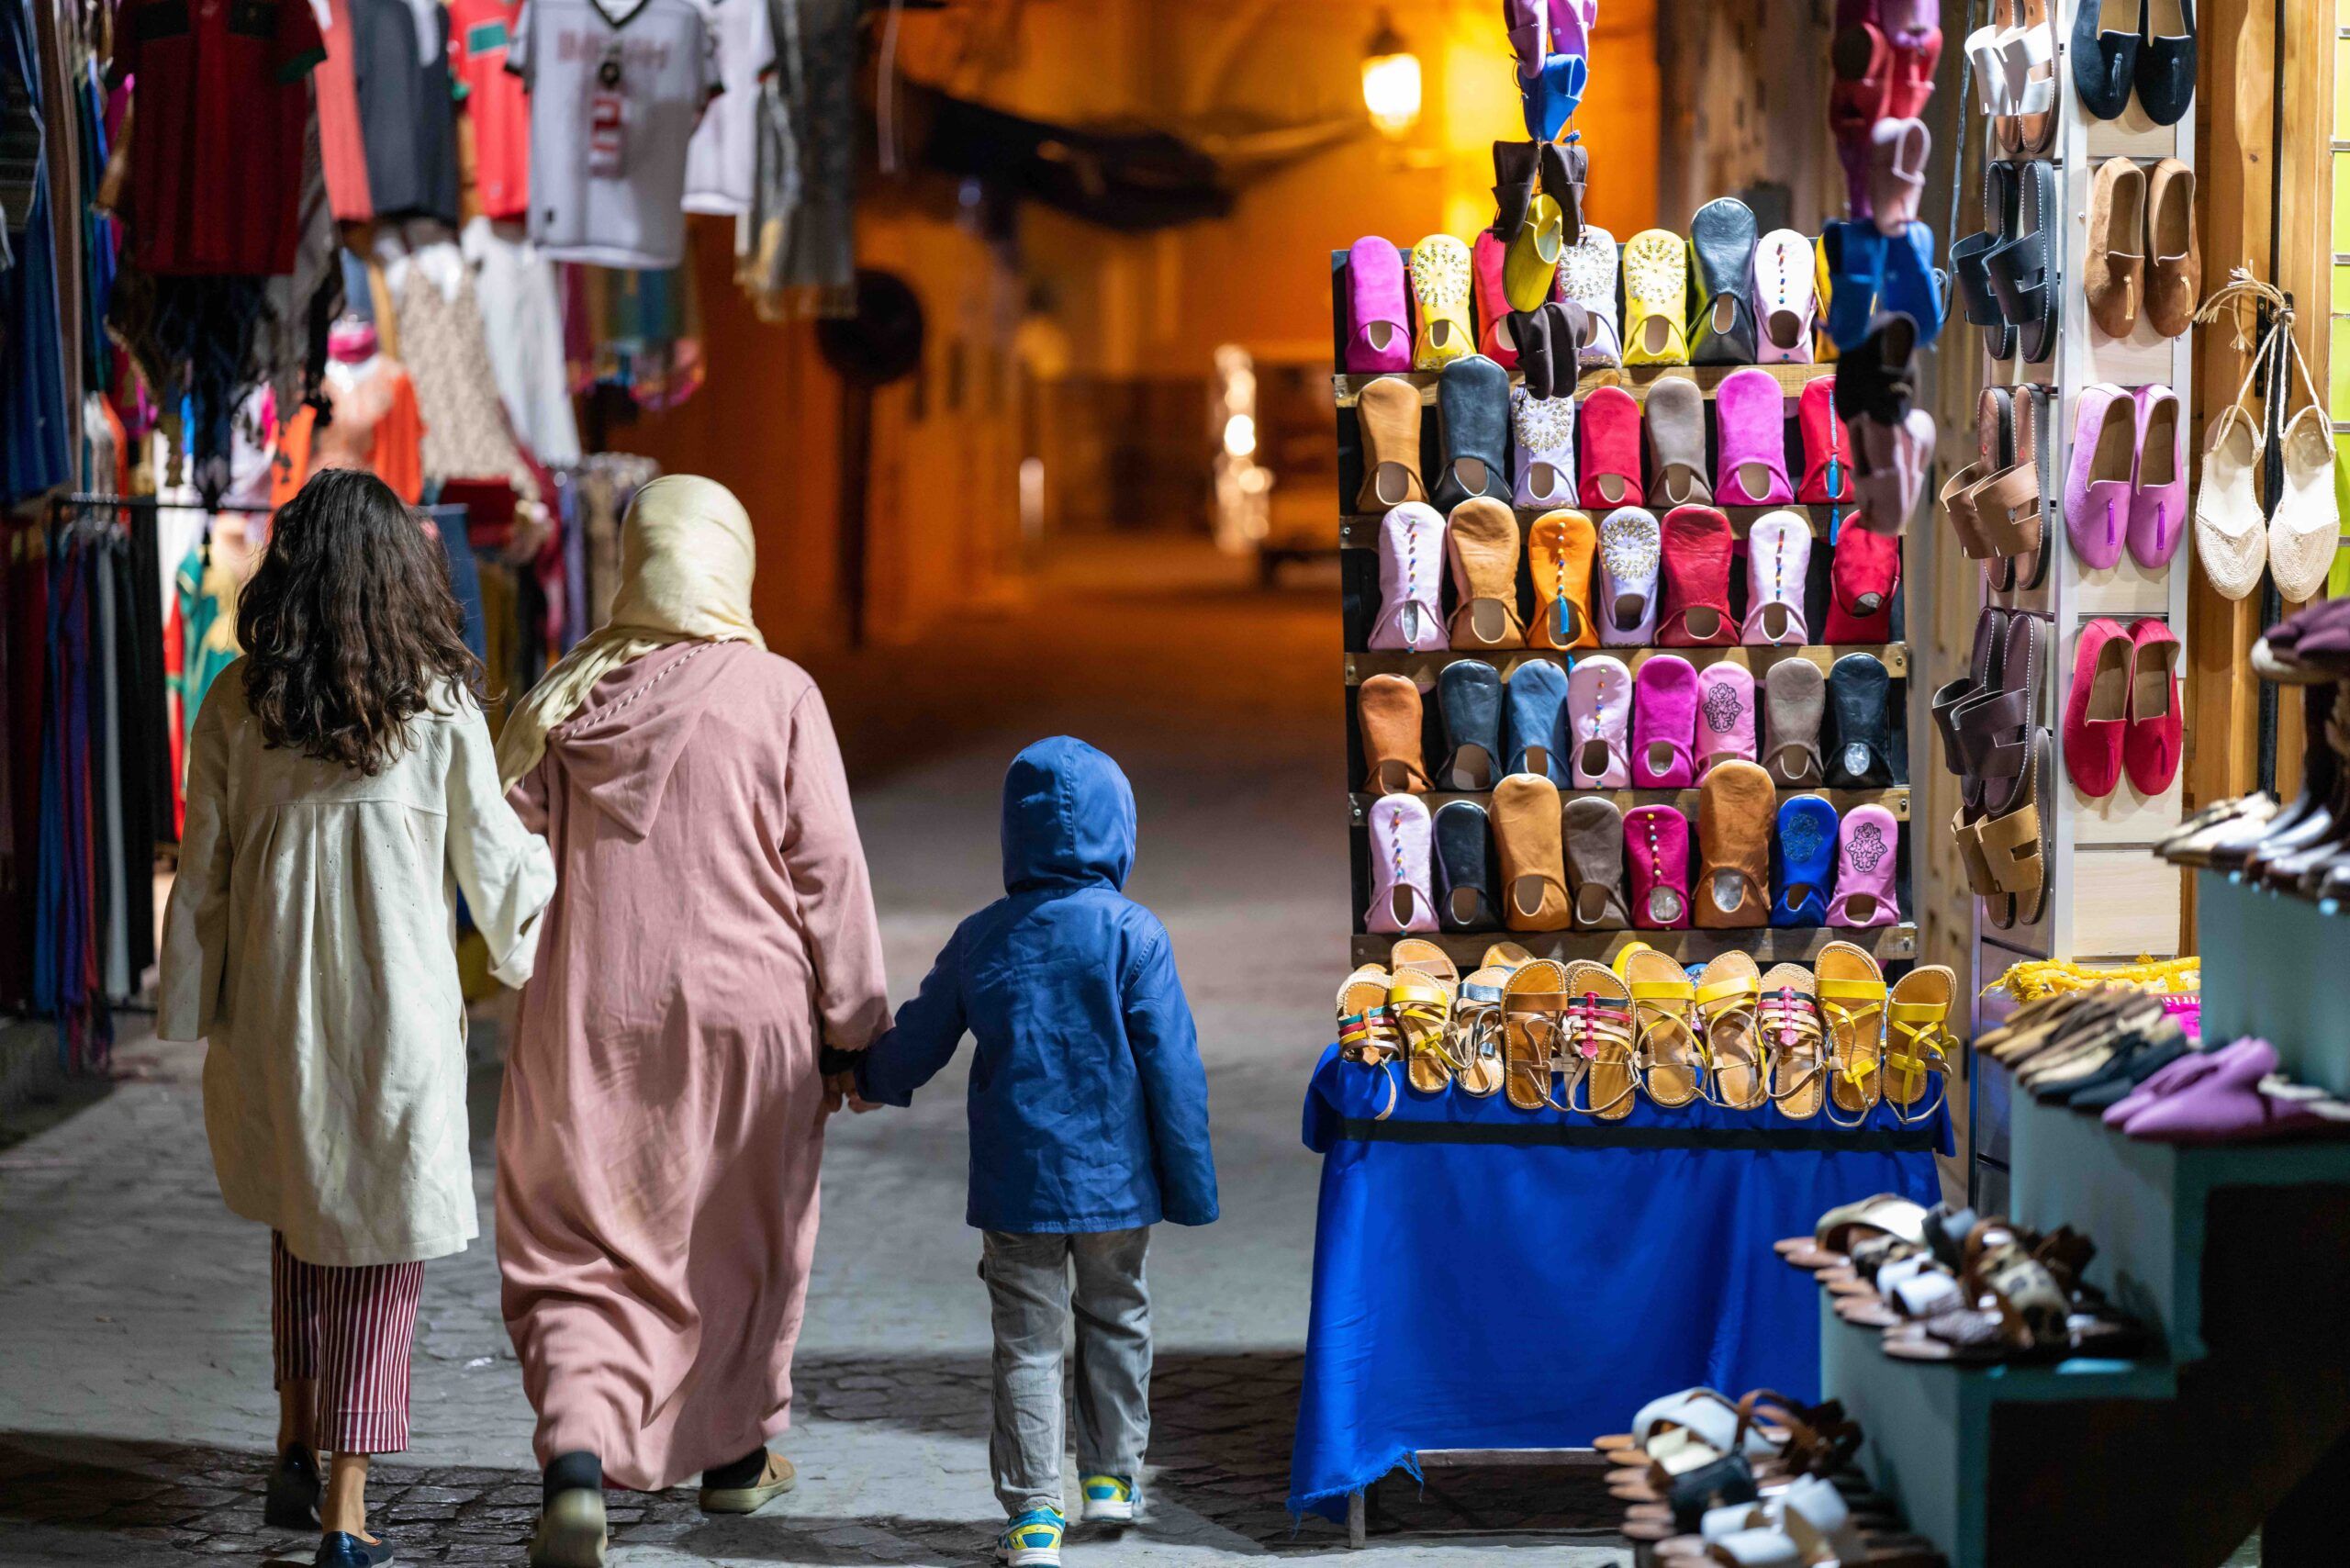 Two people and a child walking in a street market in Marrakesh with their backs towards the camera. One of the adults has brown hair, and the other has a headscarf. The child is wearing a blue jacket.